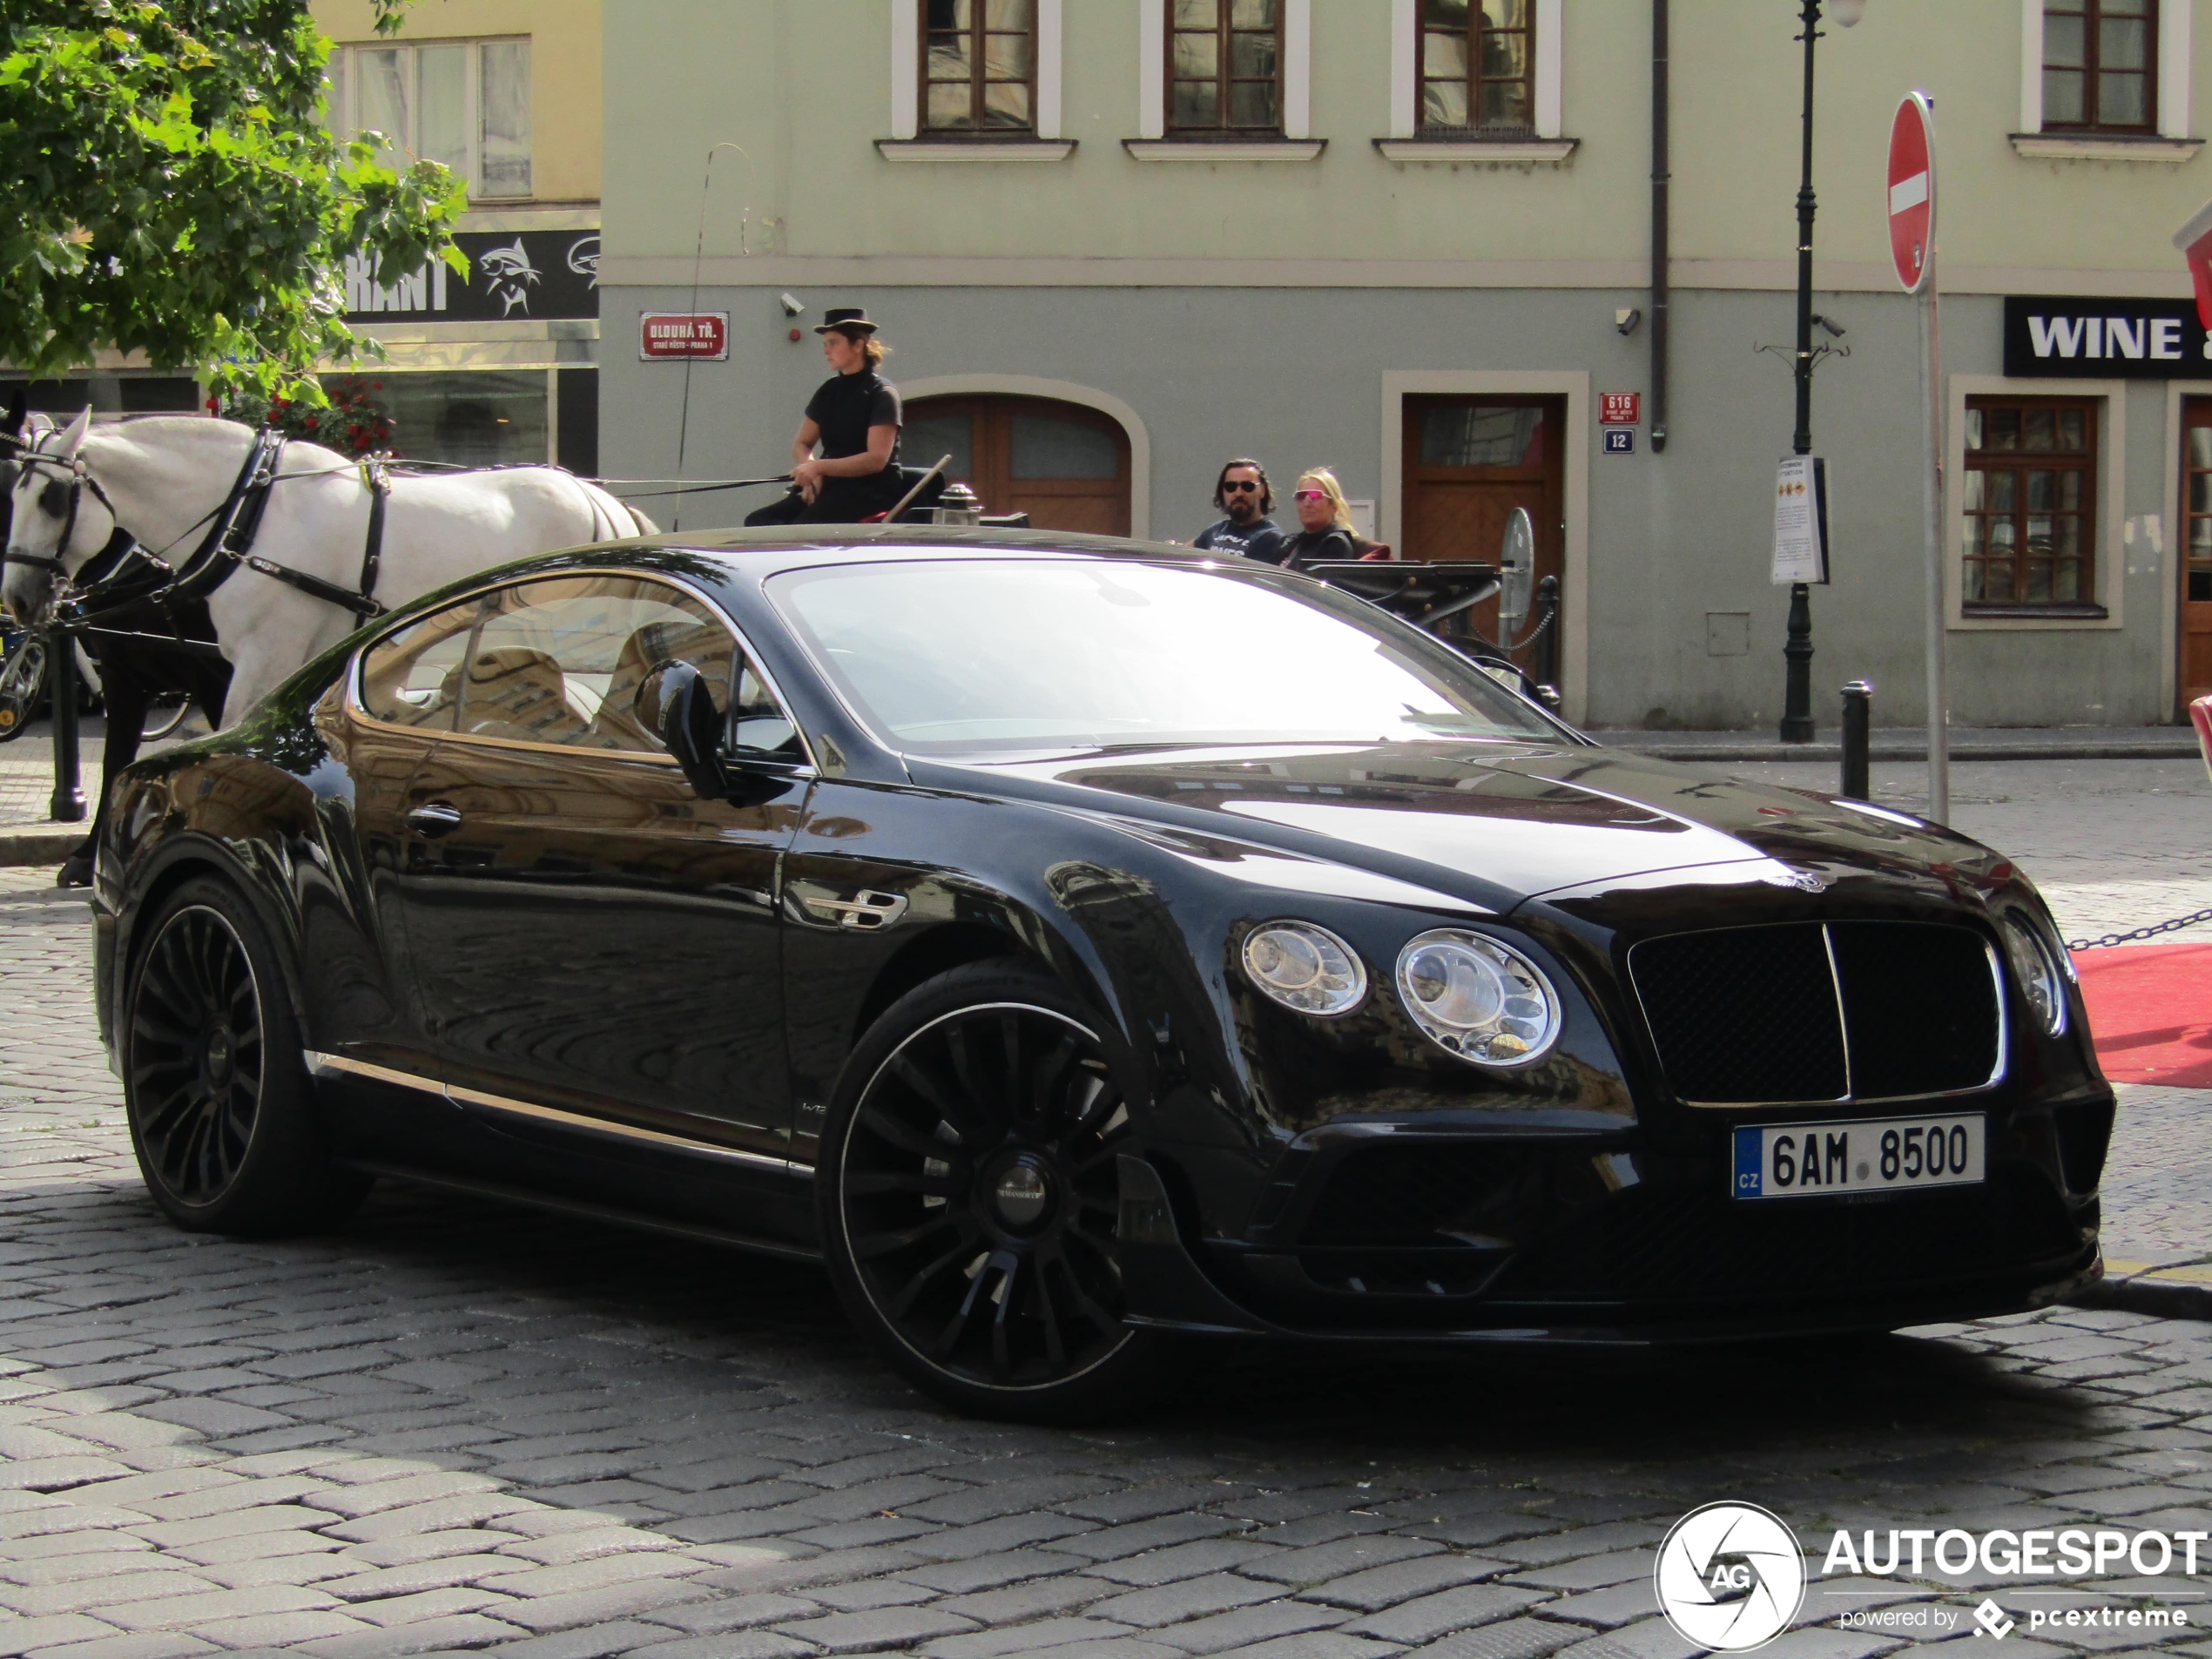 Bentley Mansory Continental GT 2016